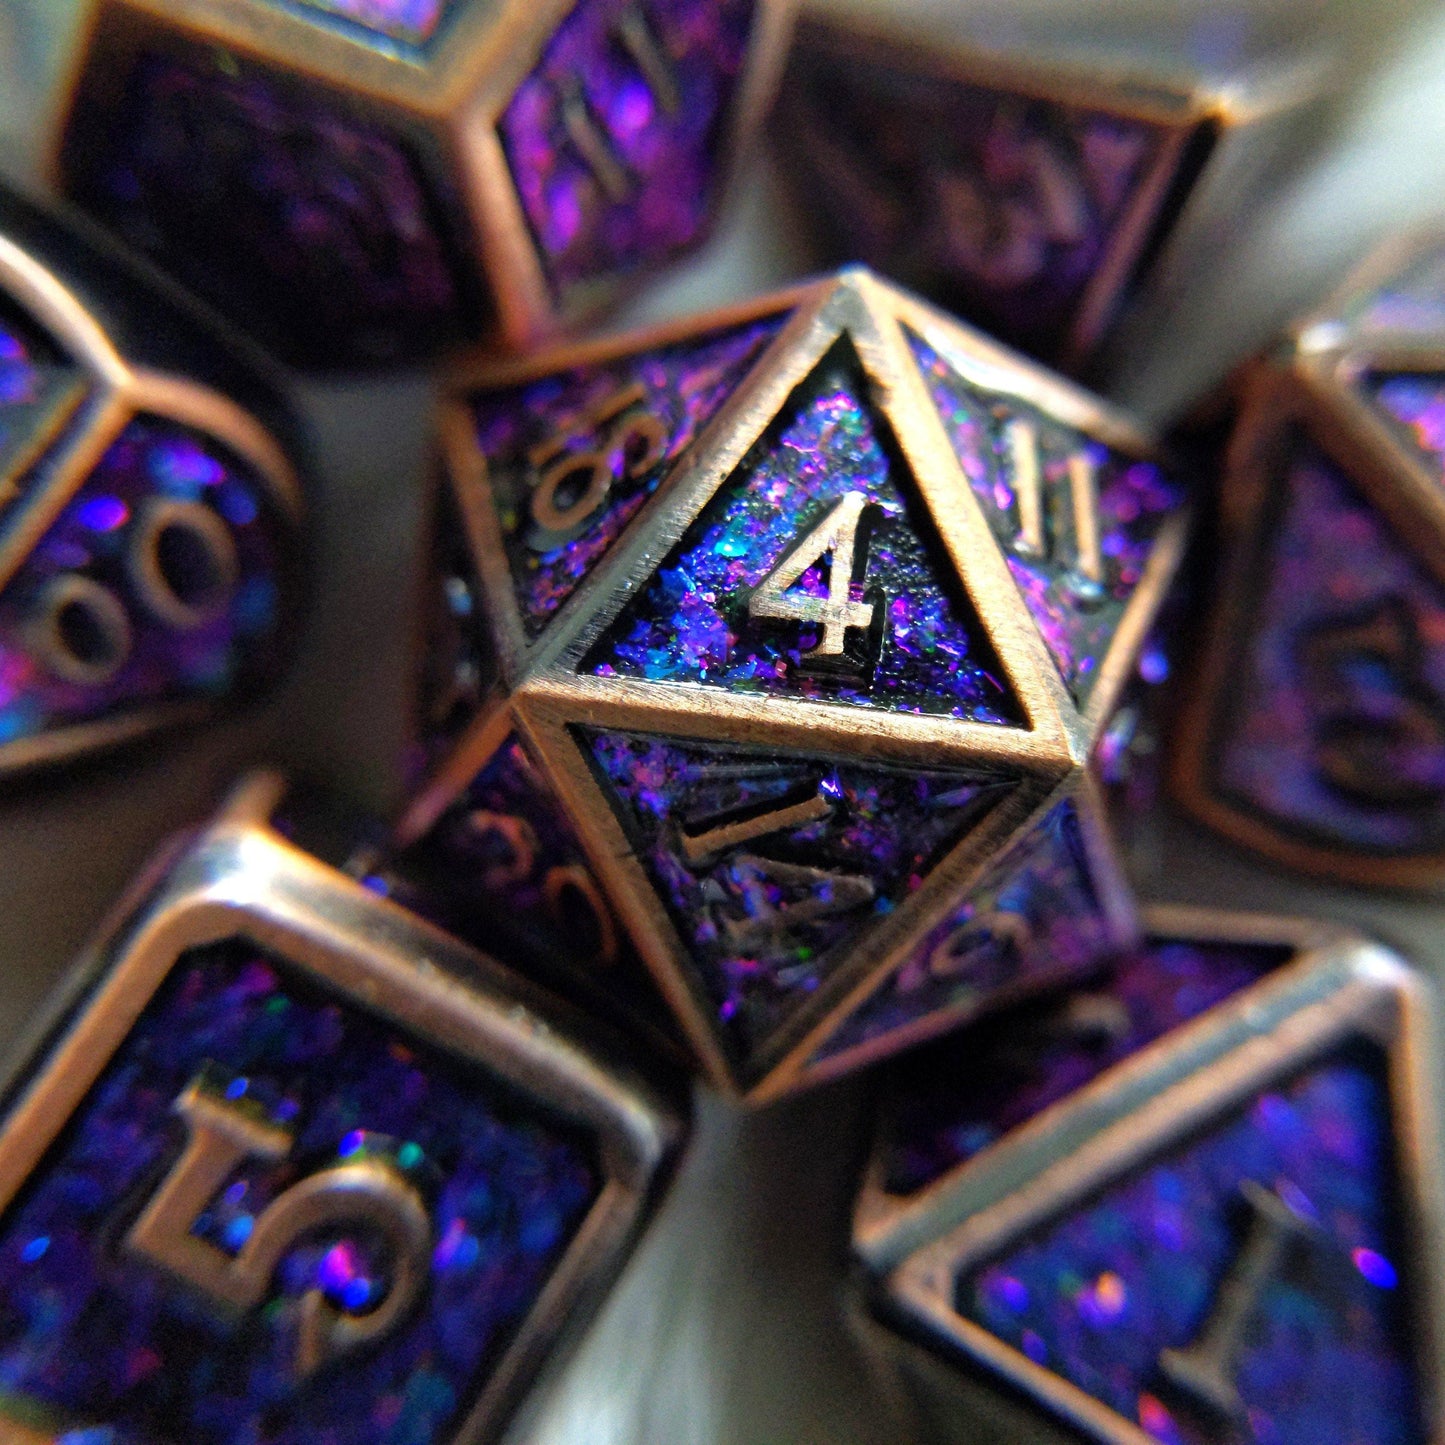 Enchantment Copper Metal Dice Set with Blue and Purple Color Shifting Glitter - CozyGamer